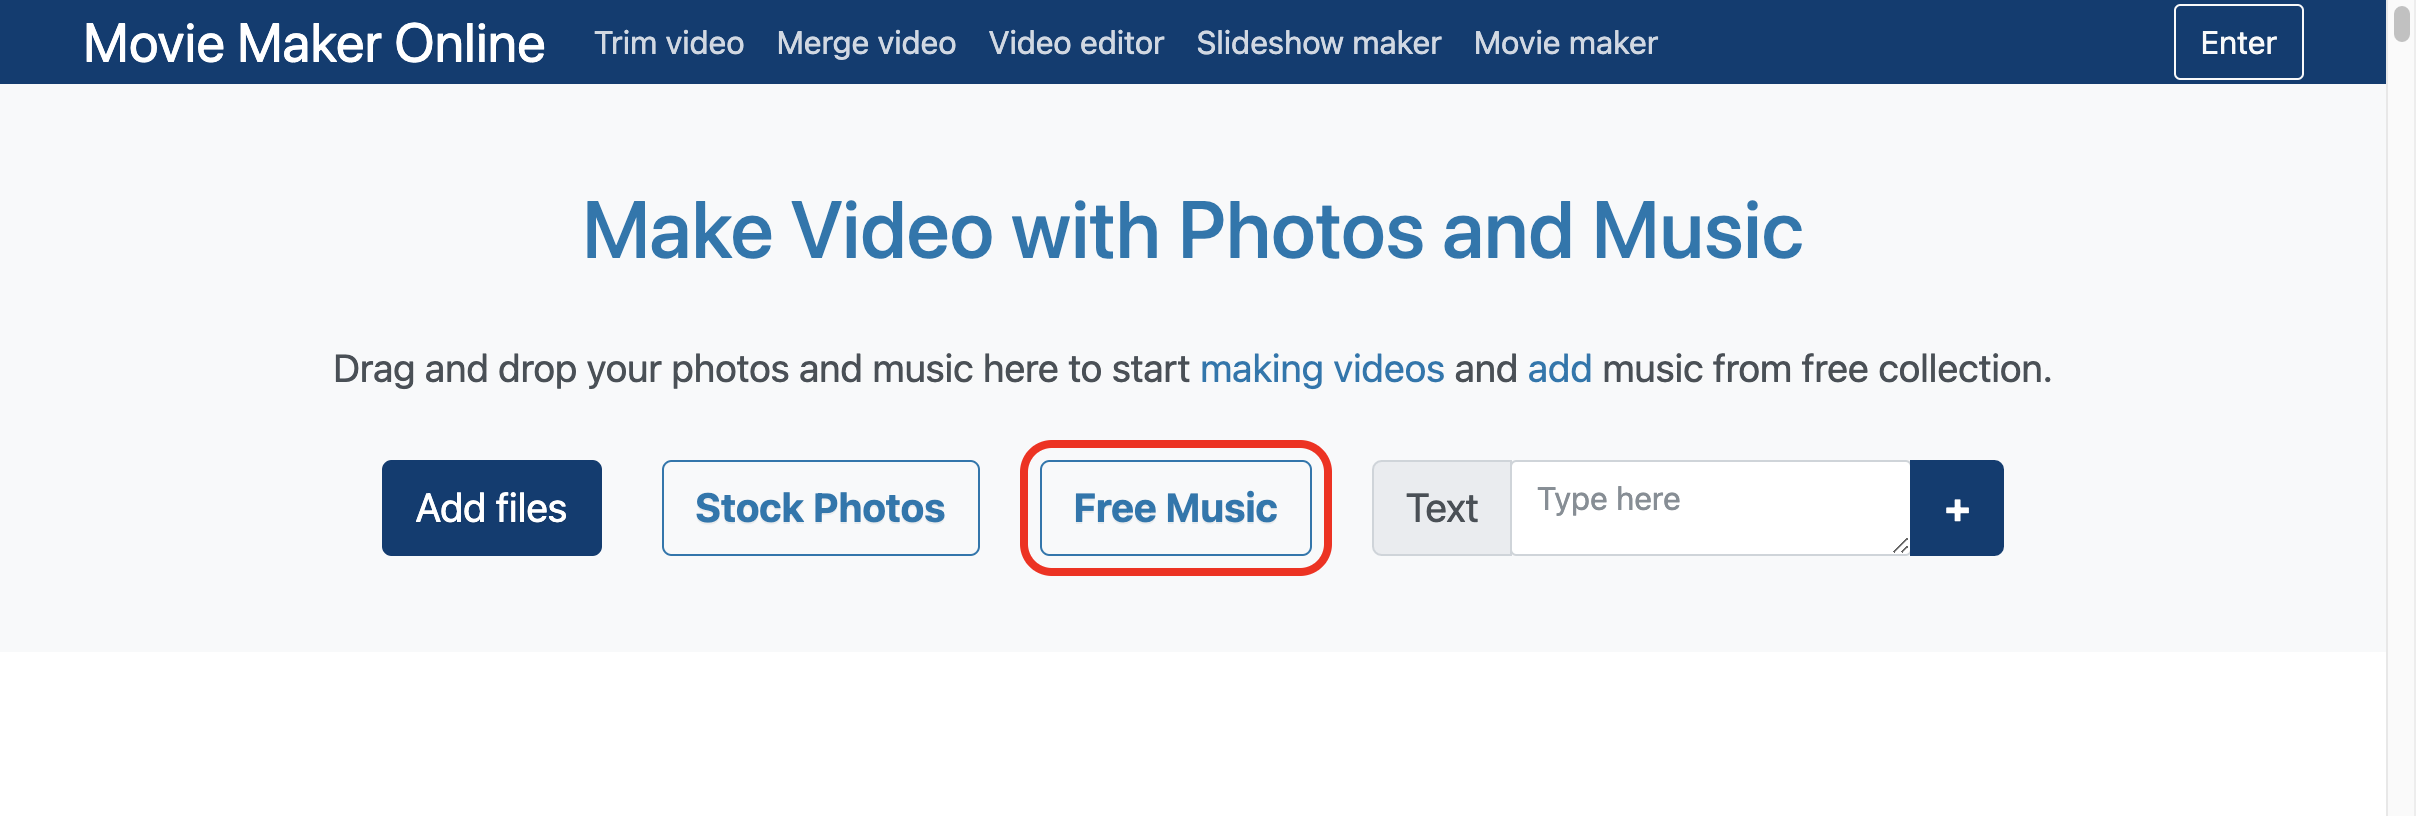 Make video with photos and free music